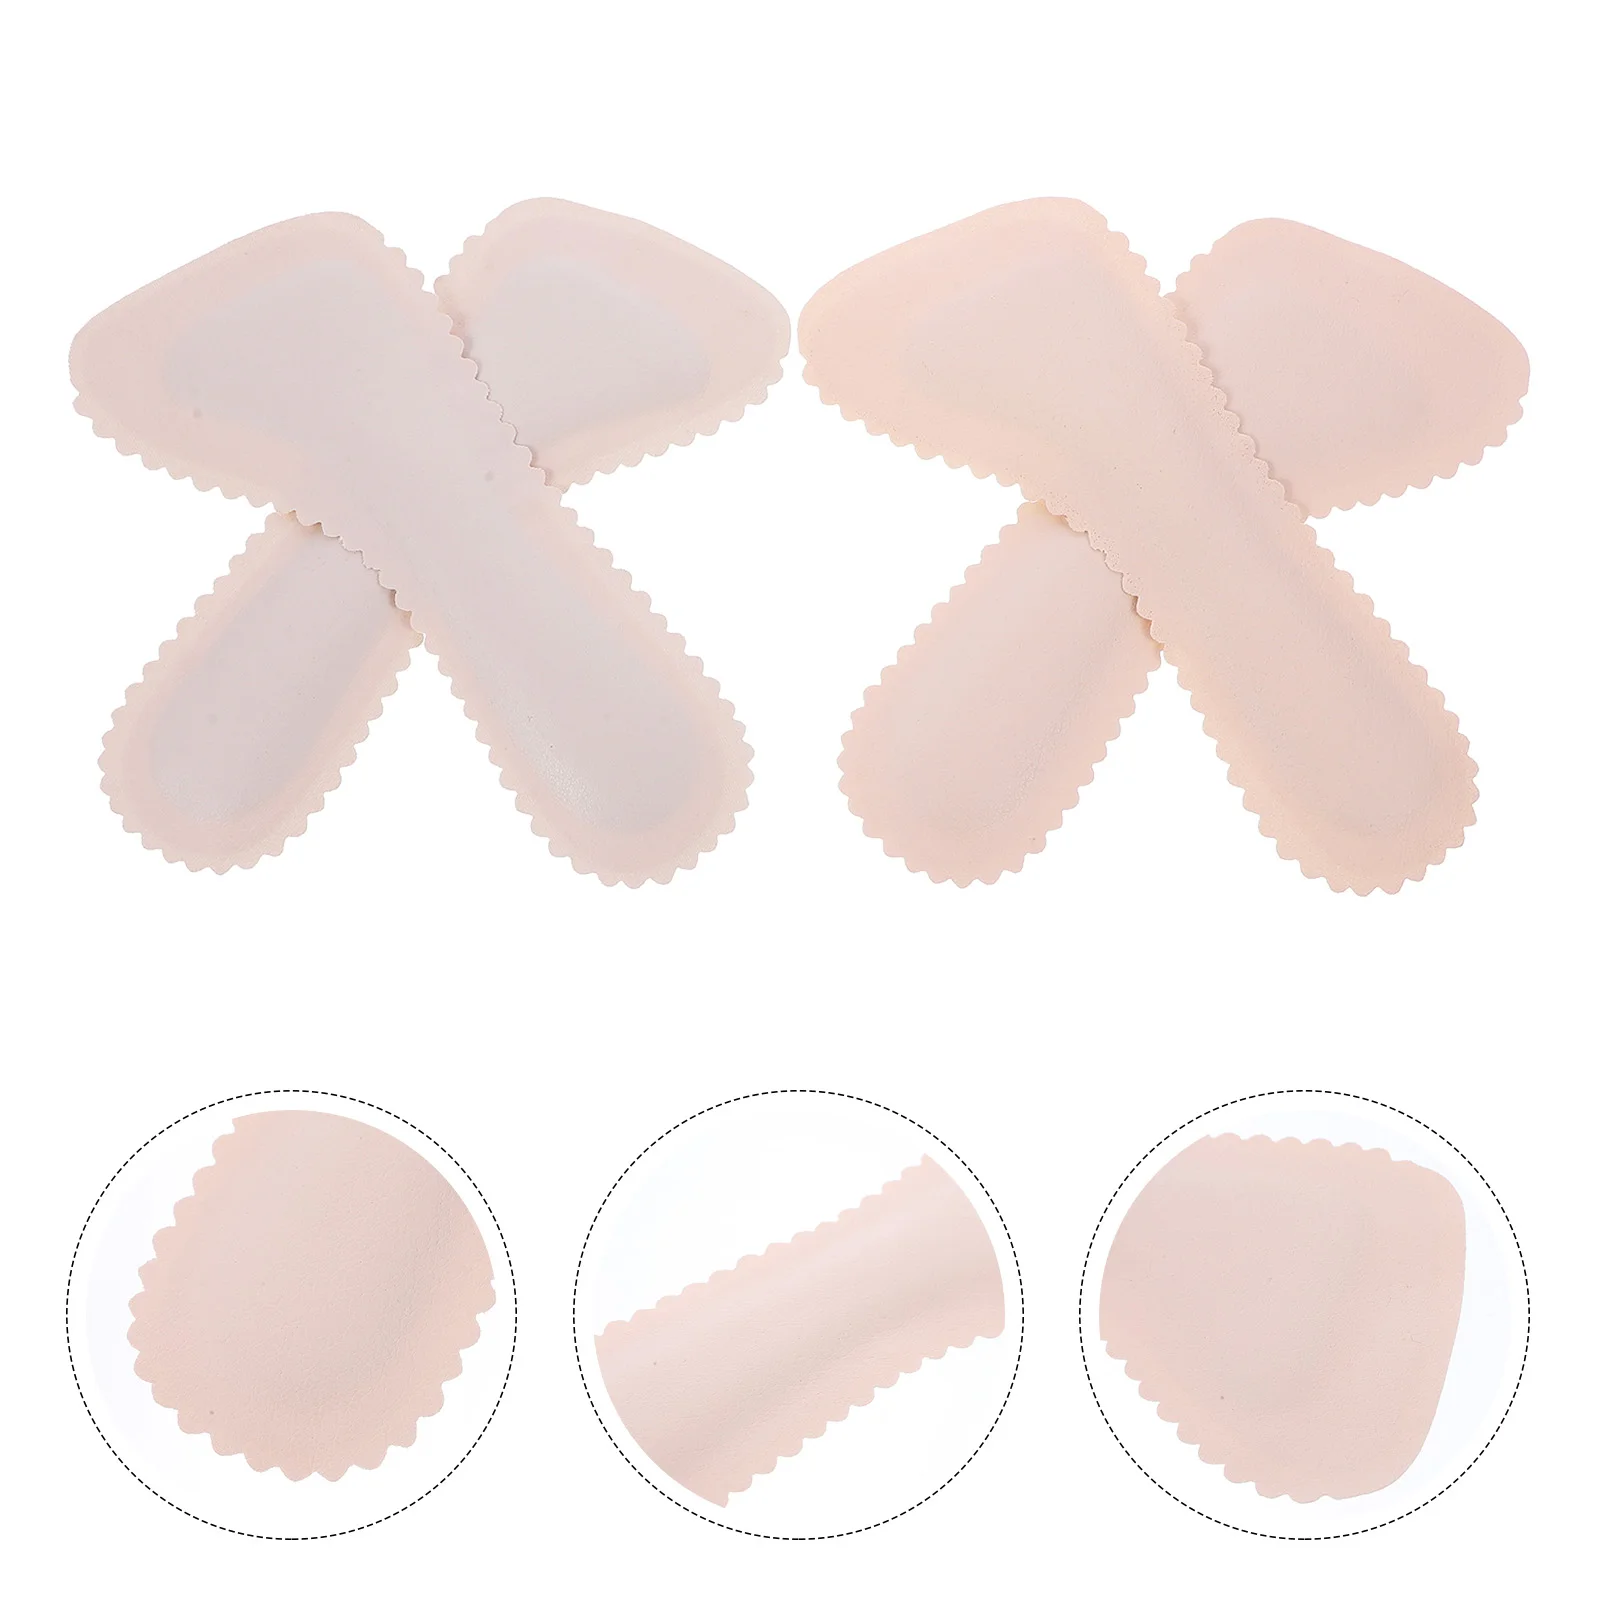 2 Pairs Cork Insoles Anti Shoe Inserts Self Adhesive Insoles Shoe Cushions